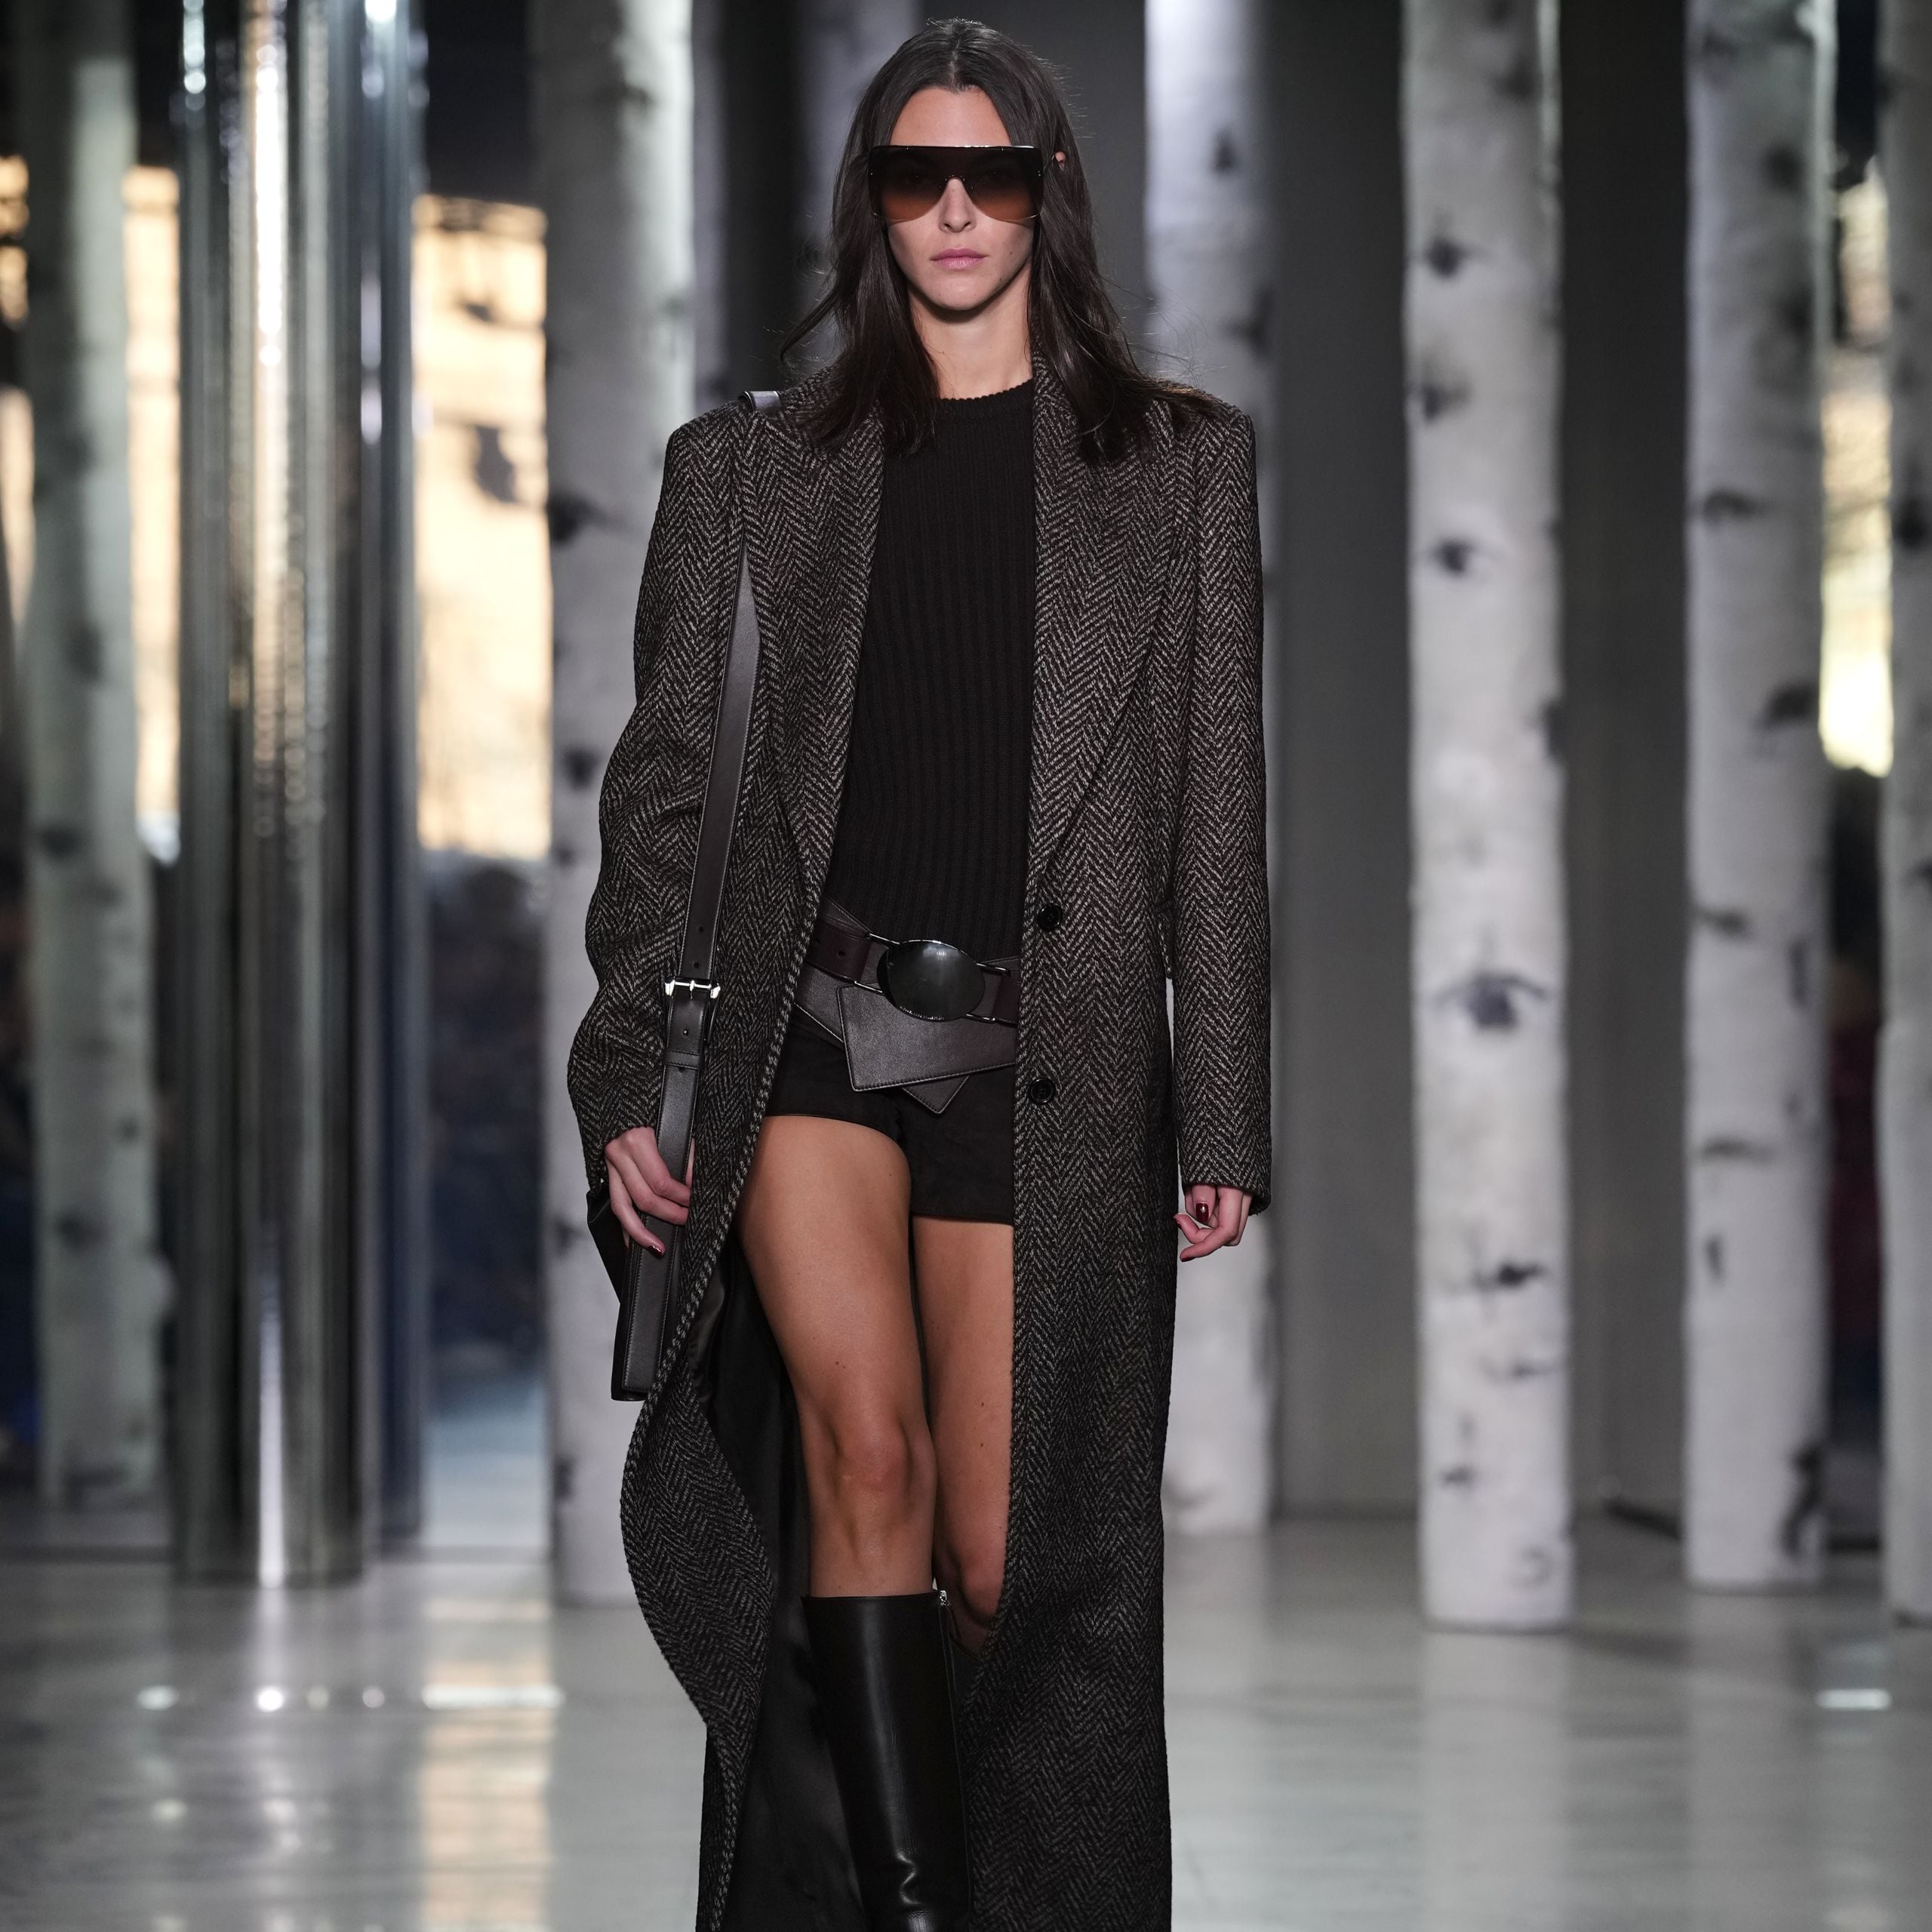 Michael Kors Collection Spring 2020 Ready-to-Wear Fashion Show